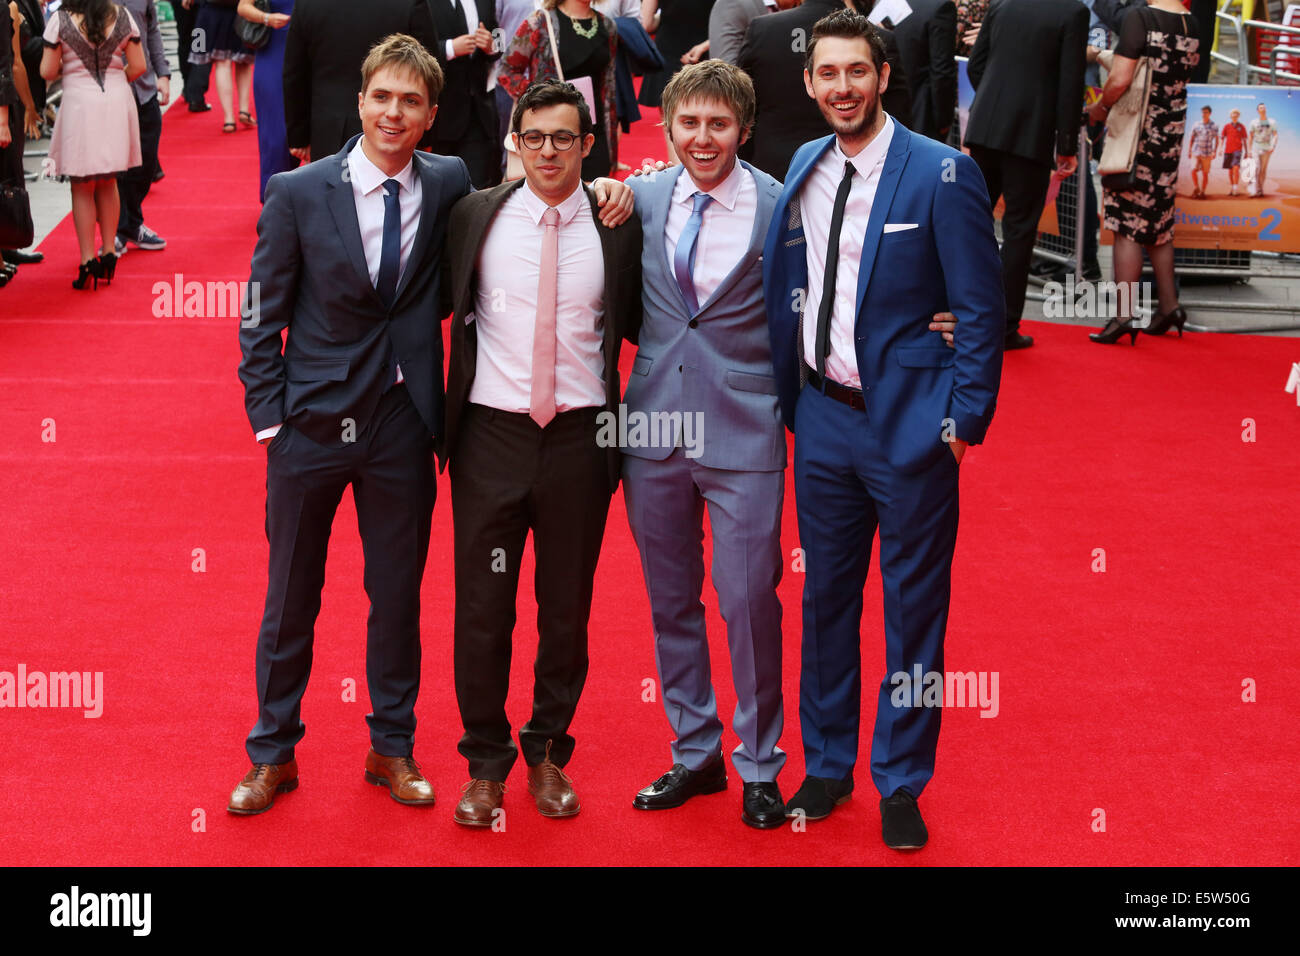 London, UK. 5th Aug, 2014. Simon Bird, James Buckley, Blake Harrison & Joe Thomas attends The World Premiere of The Inbetweeners 2 on 05/08/2014 at The VUE Leicester Square, London. Persons pictured: Simon Bird, James Buckley, Blake Harrison, Joe Thomas. Credit:  swift-creative/Alamy Live News Stock Photo